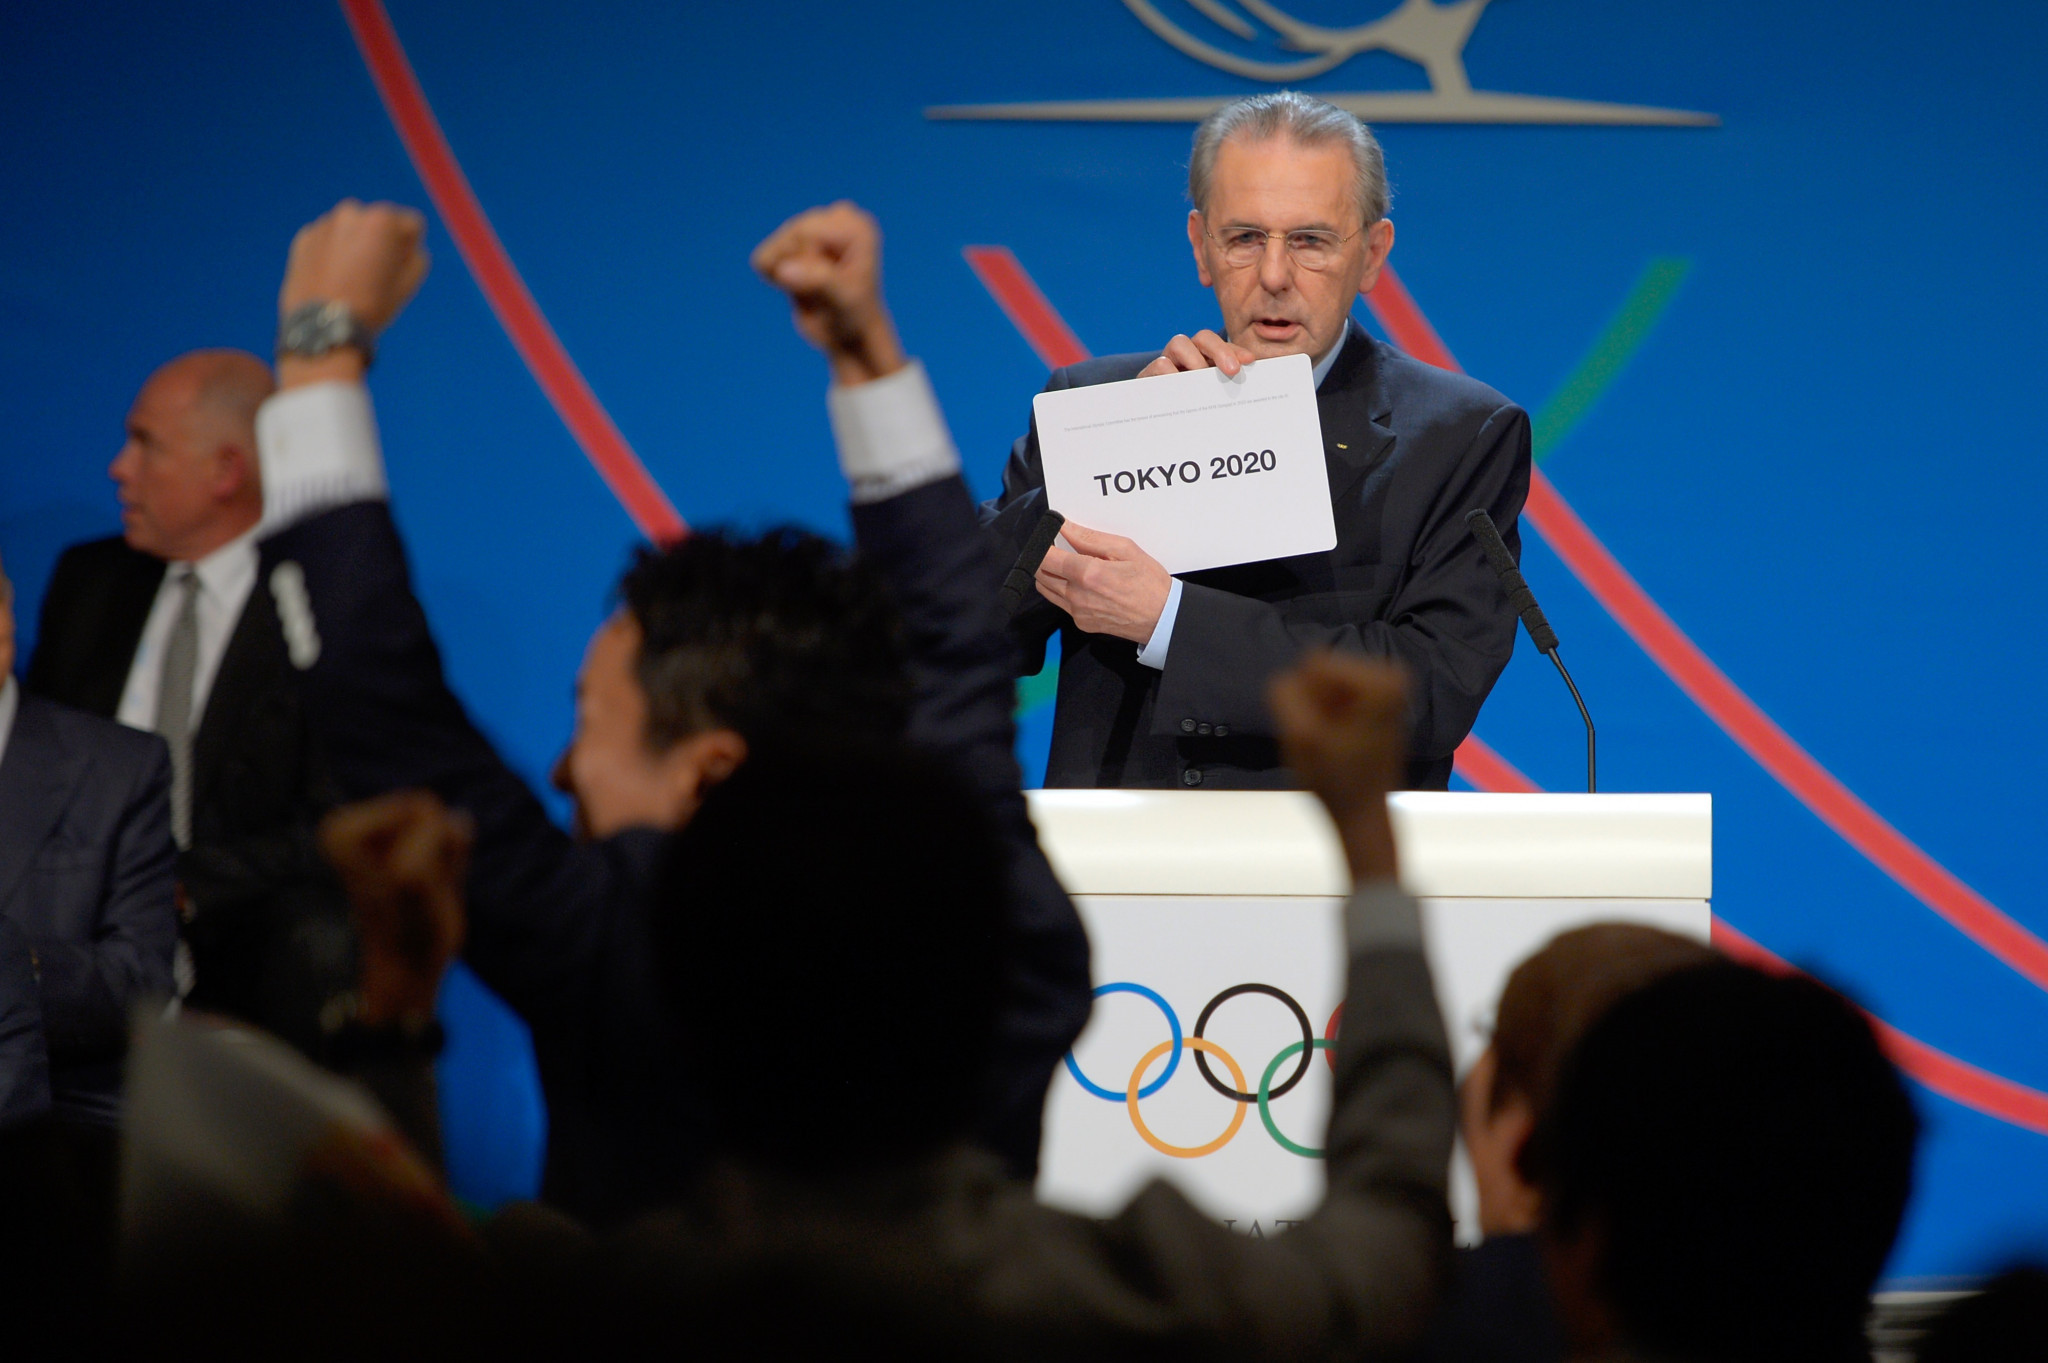 Jacques Rogge announced Tokyo as the hosts of the 2020 Olympics and Paralympics during his time as IOC President ©Getty Images